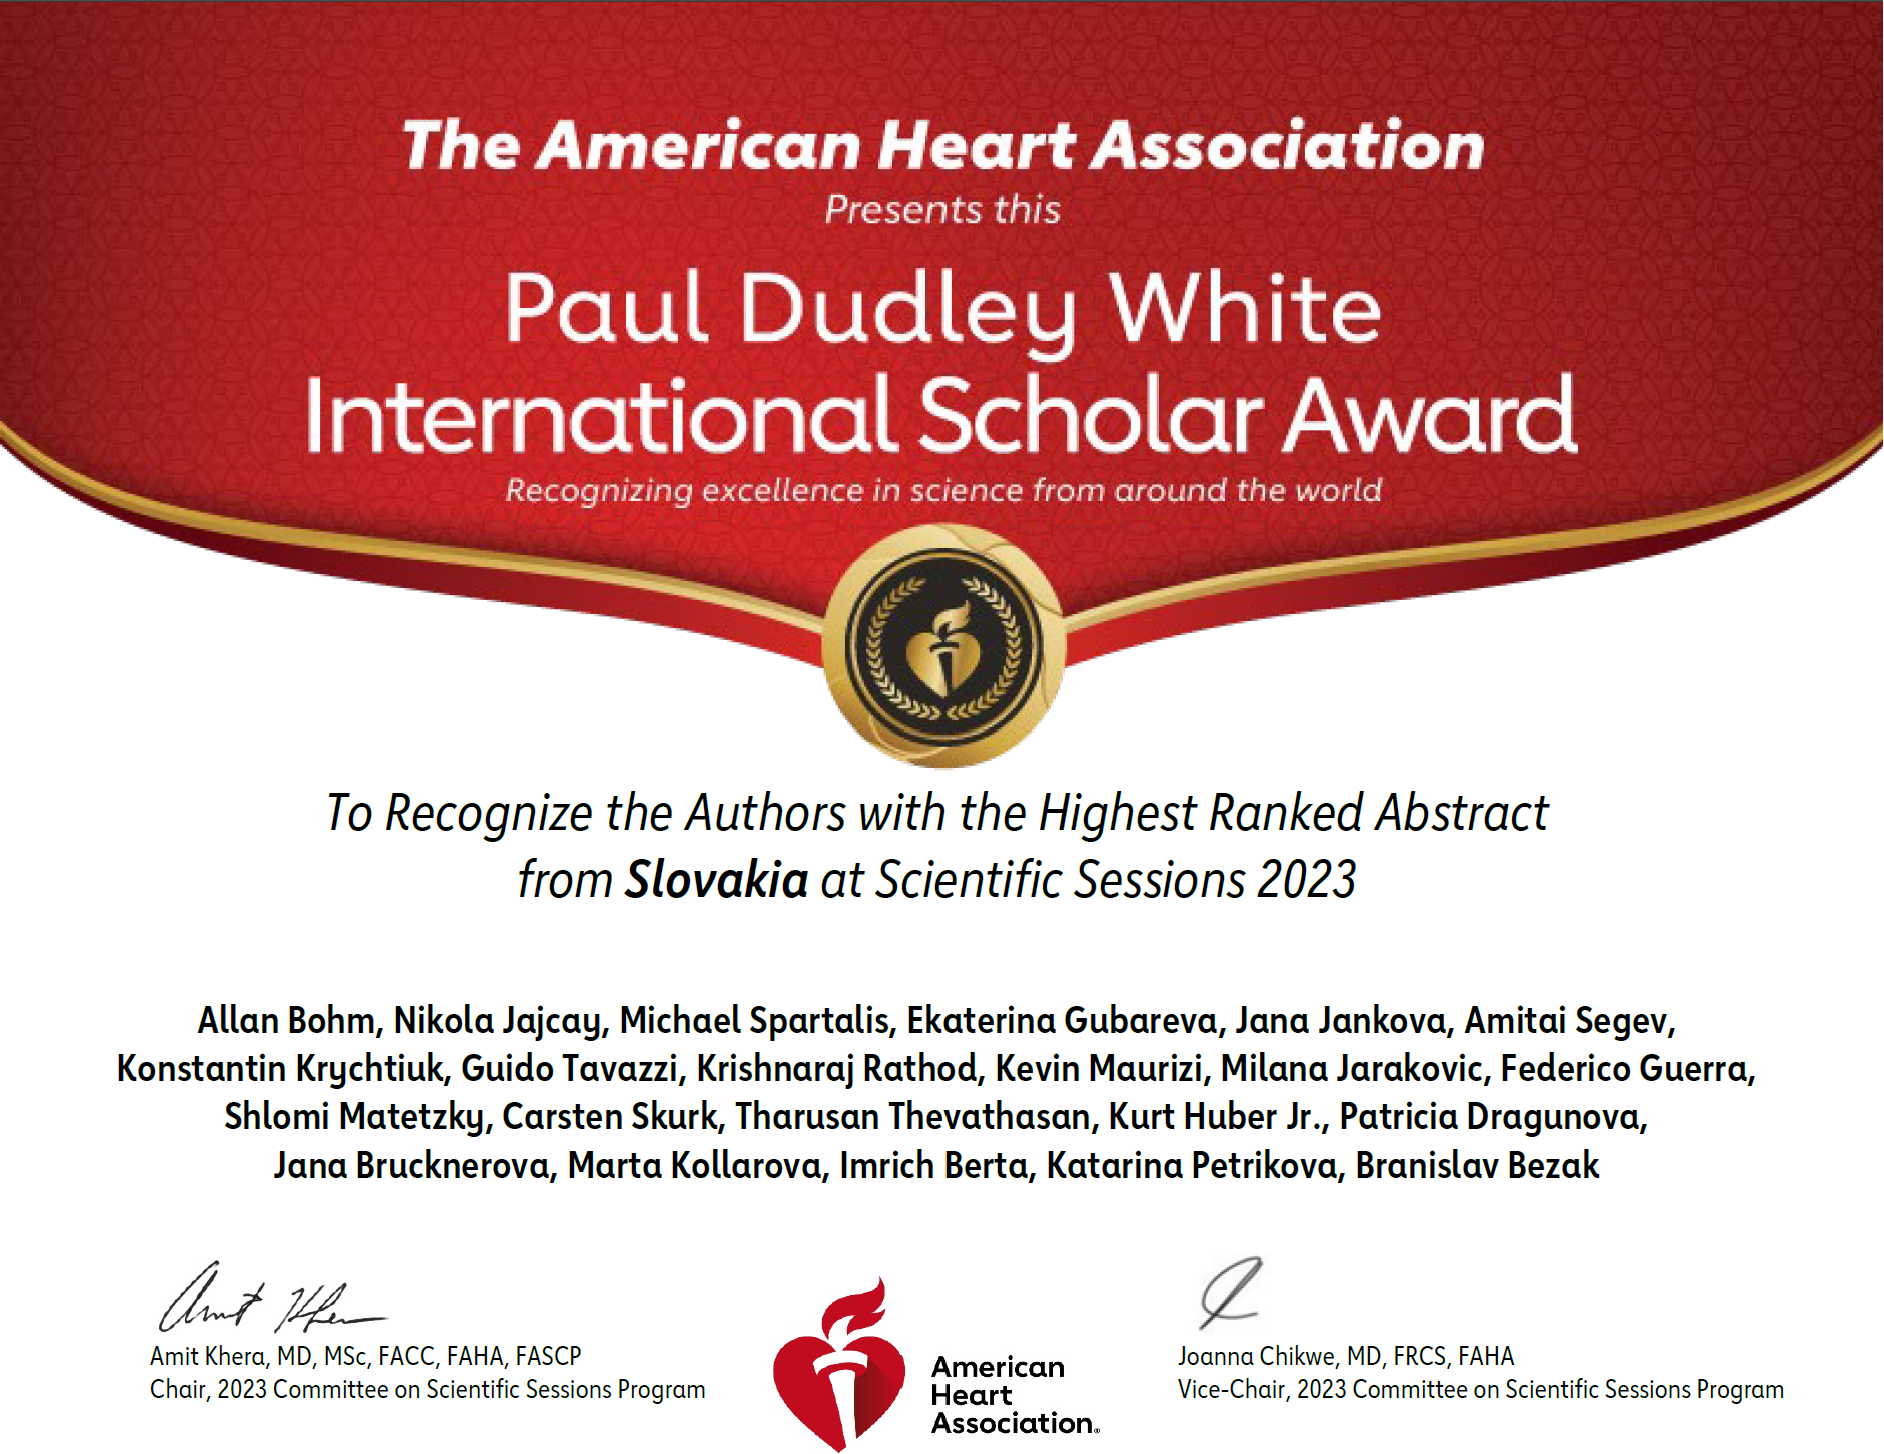 The American Heart Association - Paul Dudley White International Scholar Award for our abstract!